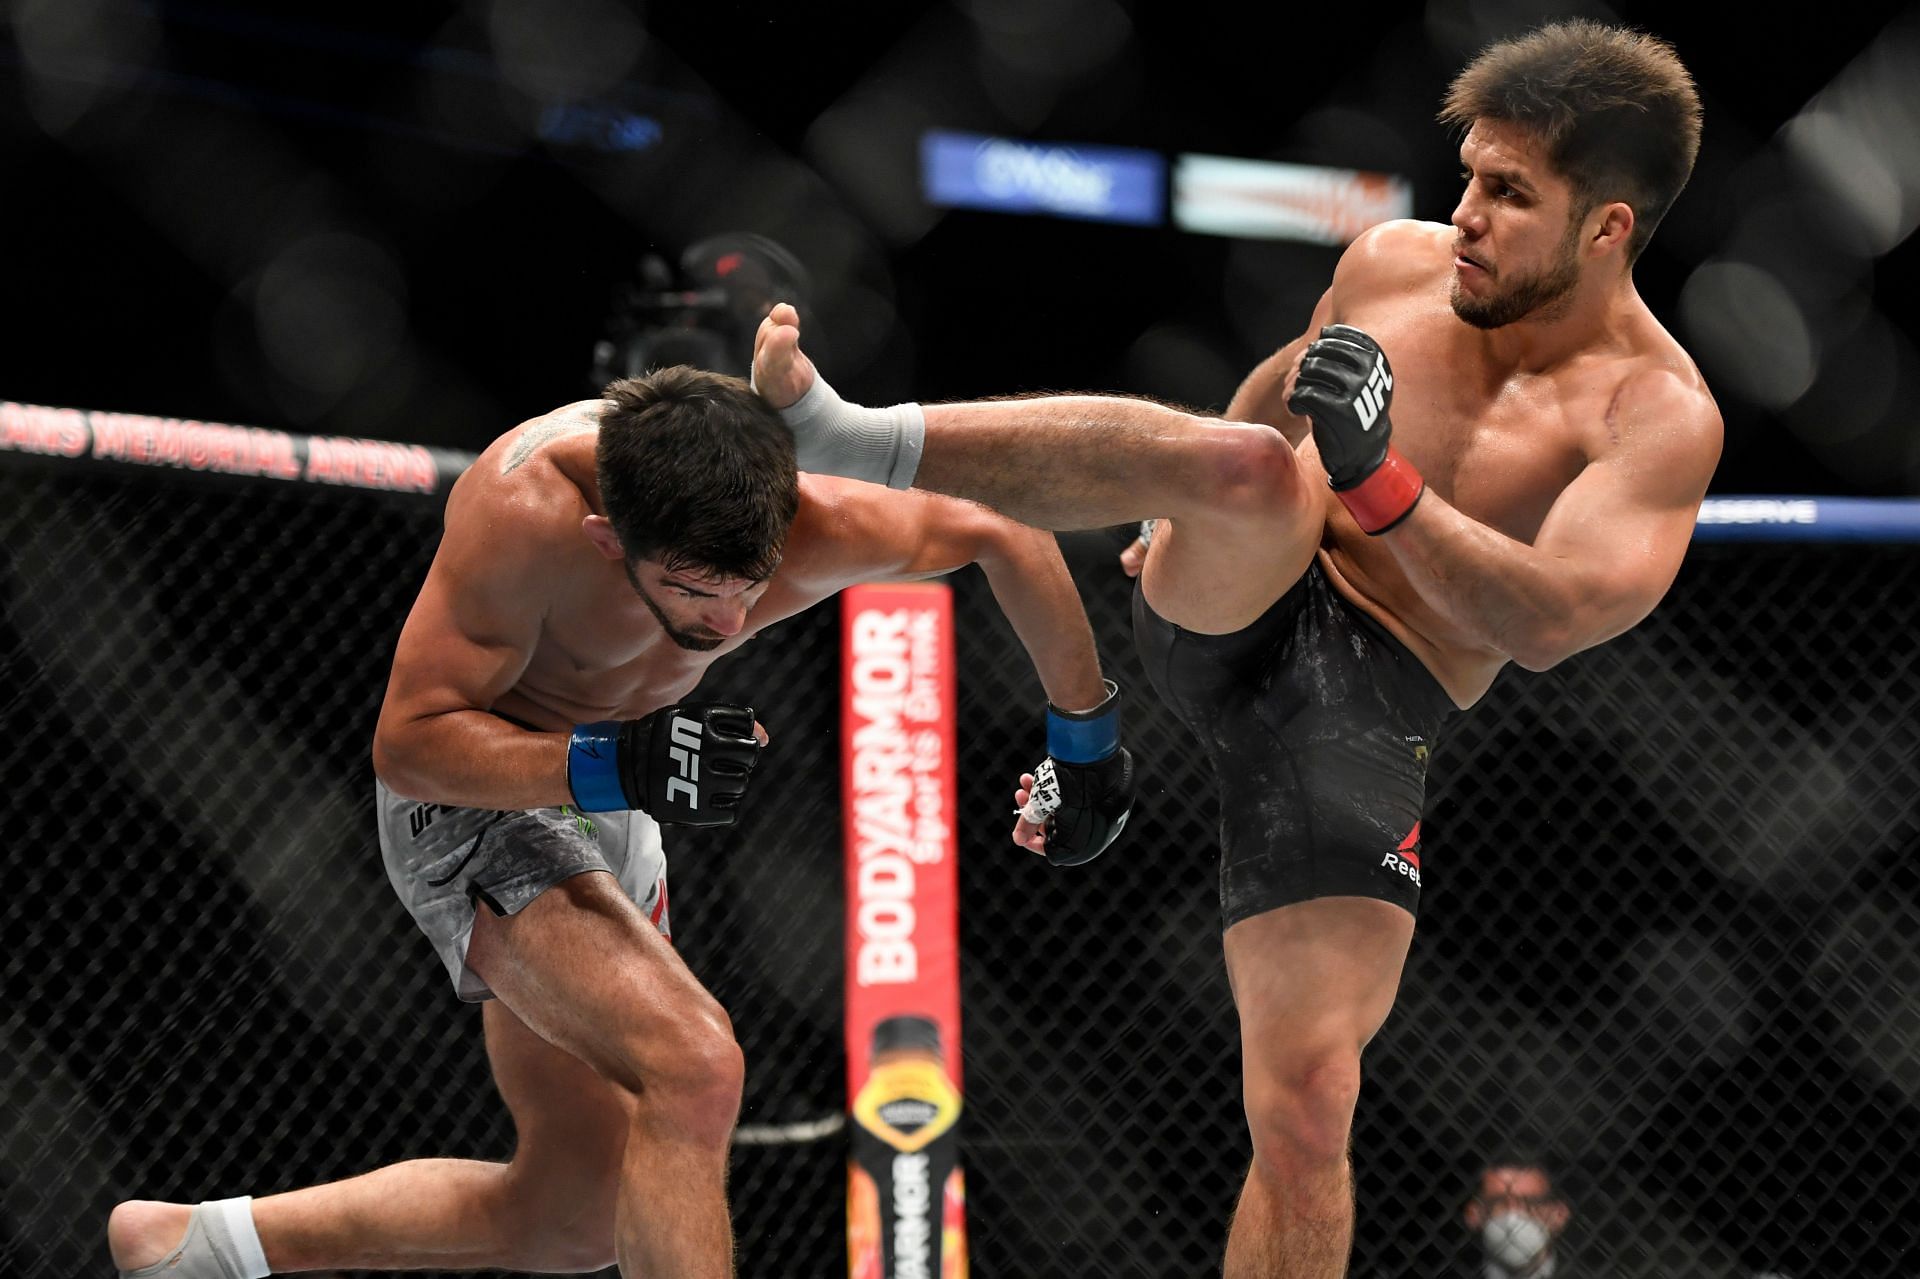 Henry Cejudo is a bad style match for Aljamain Sterling